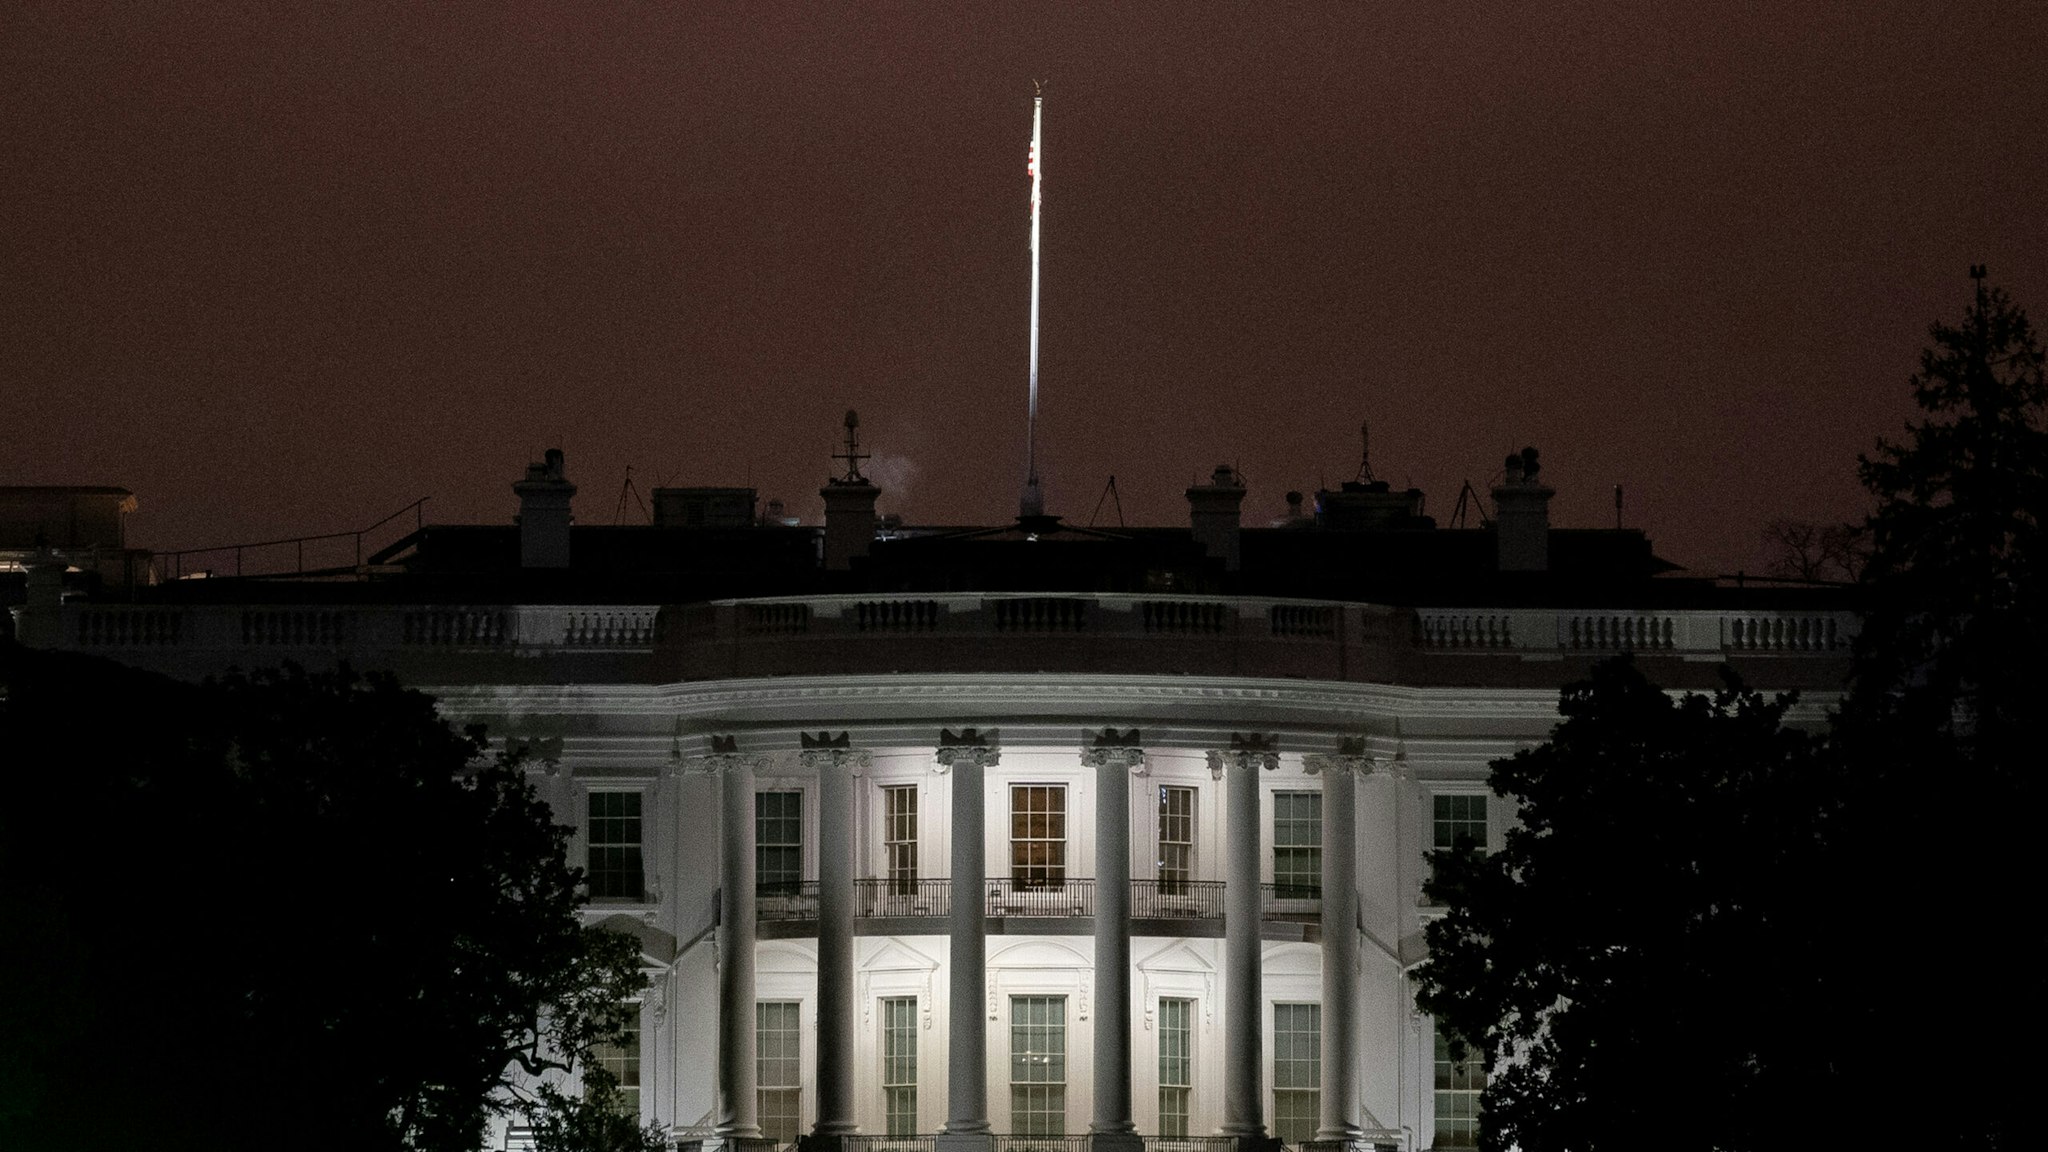 The White House in Washington, D.C., U.S., on Wednesday, Nov. 11, 2020. President-elect Biden has stocked his transition team with policy experts, academics and former Obama administration officials, a contrast with the industry-friendly figures President Trump sent into the government upon winning office.